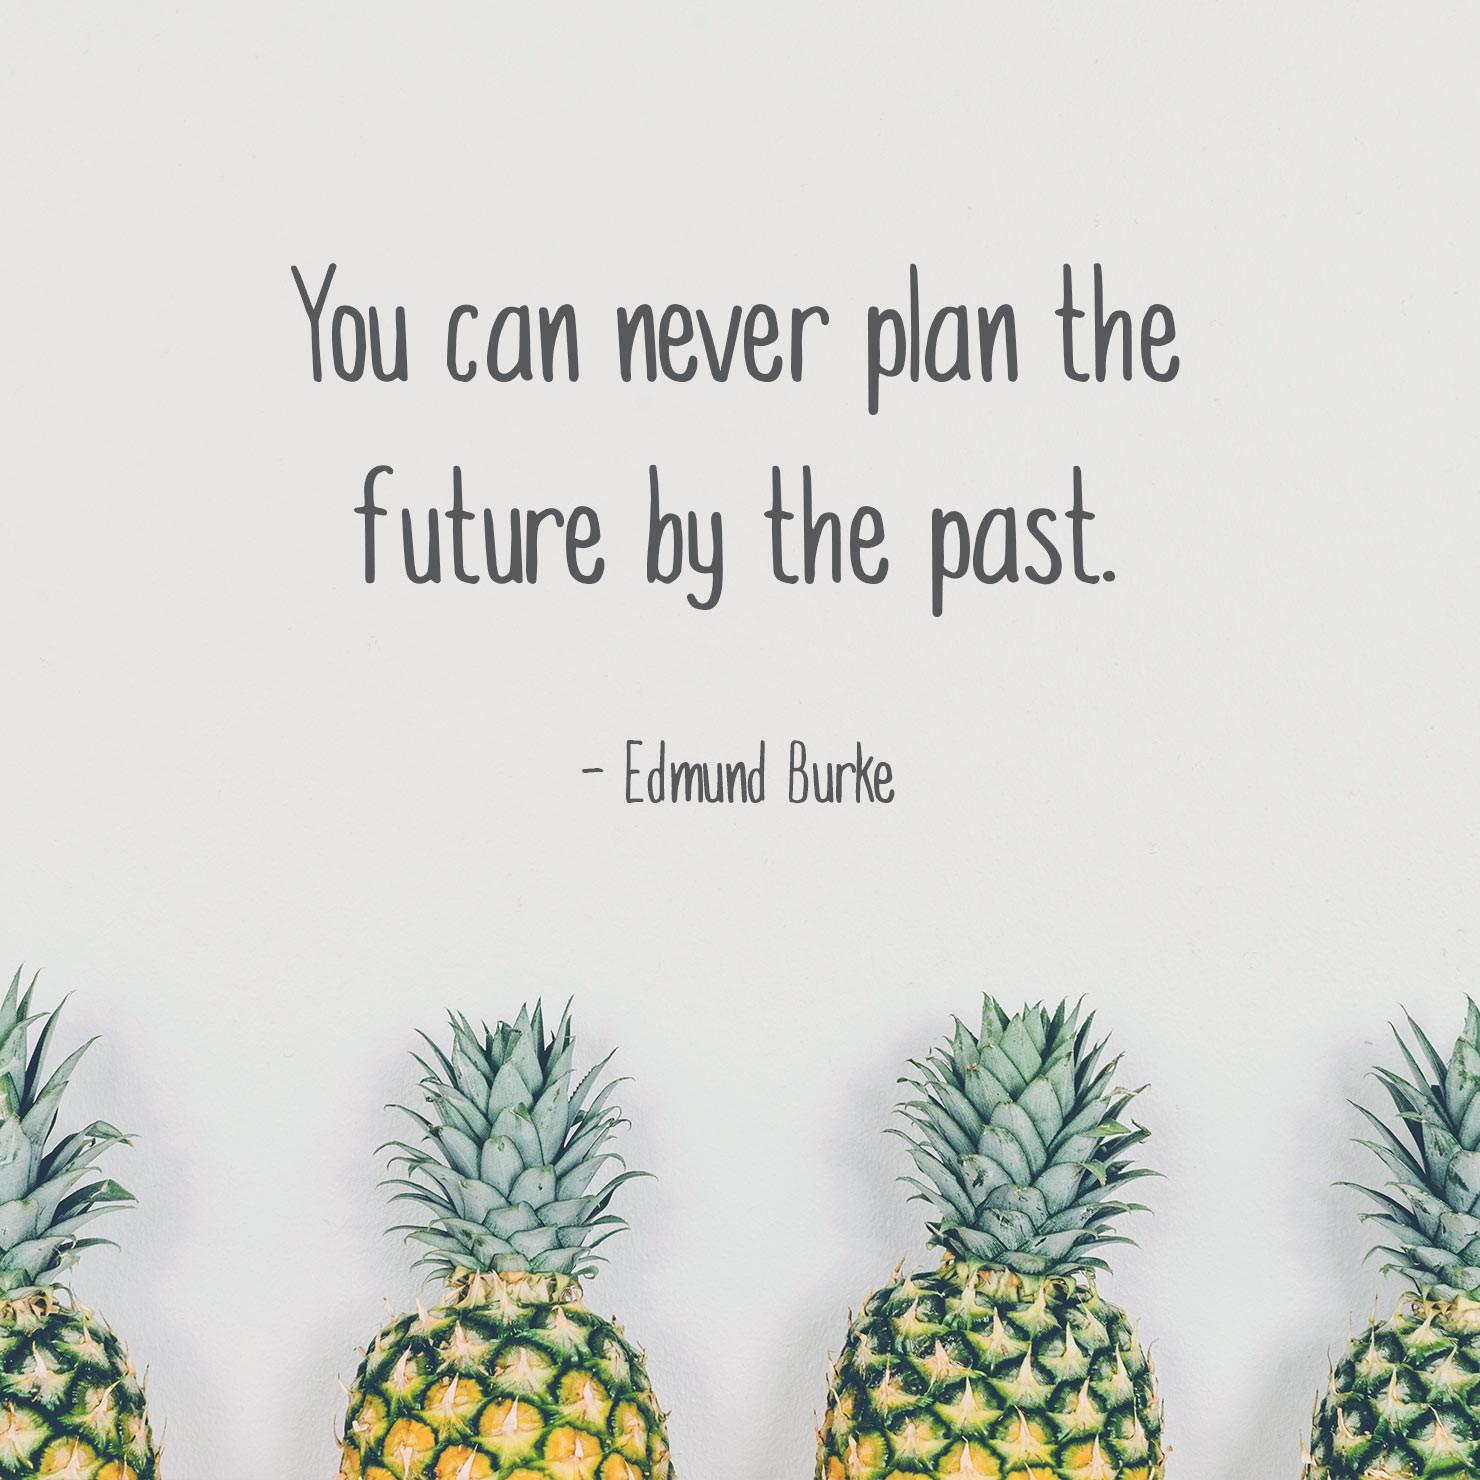 Quotes About Graduation
 100 Graduation Quotes and Sayings 2019